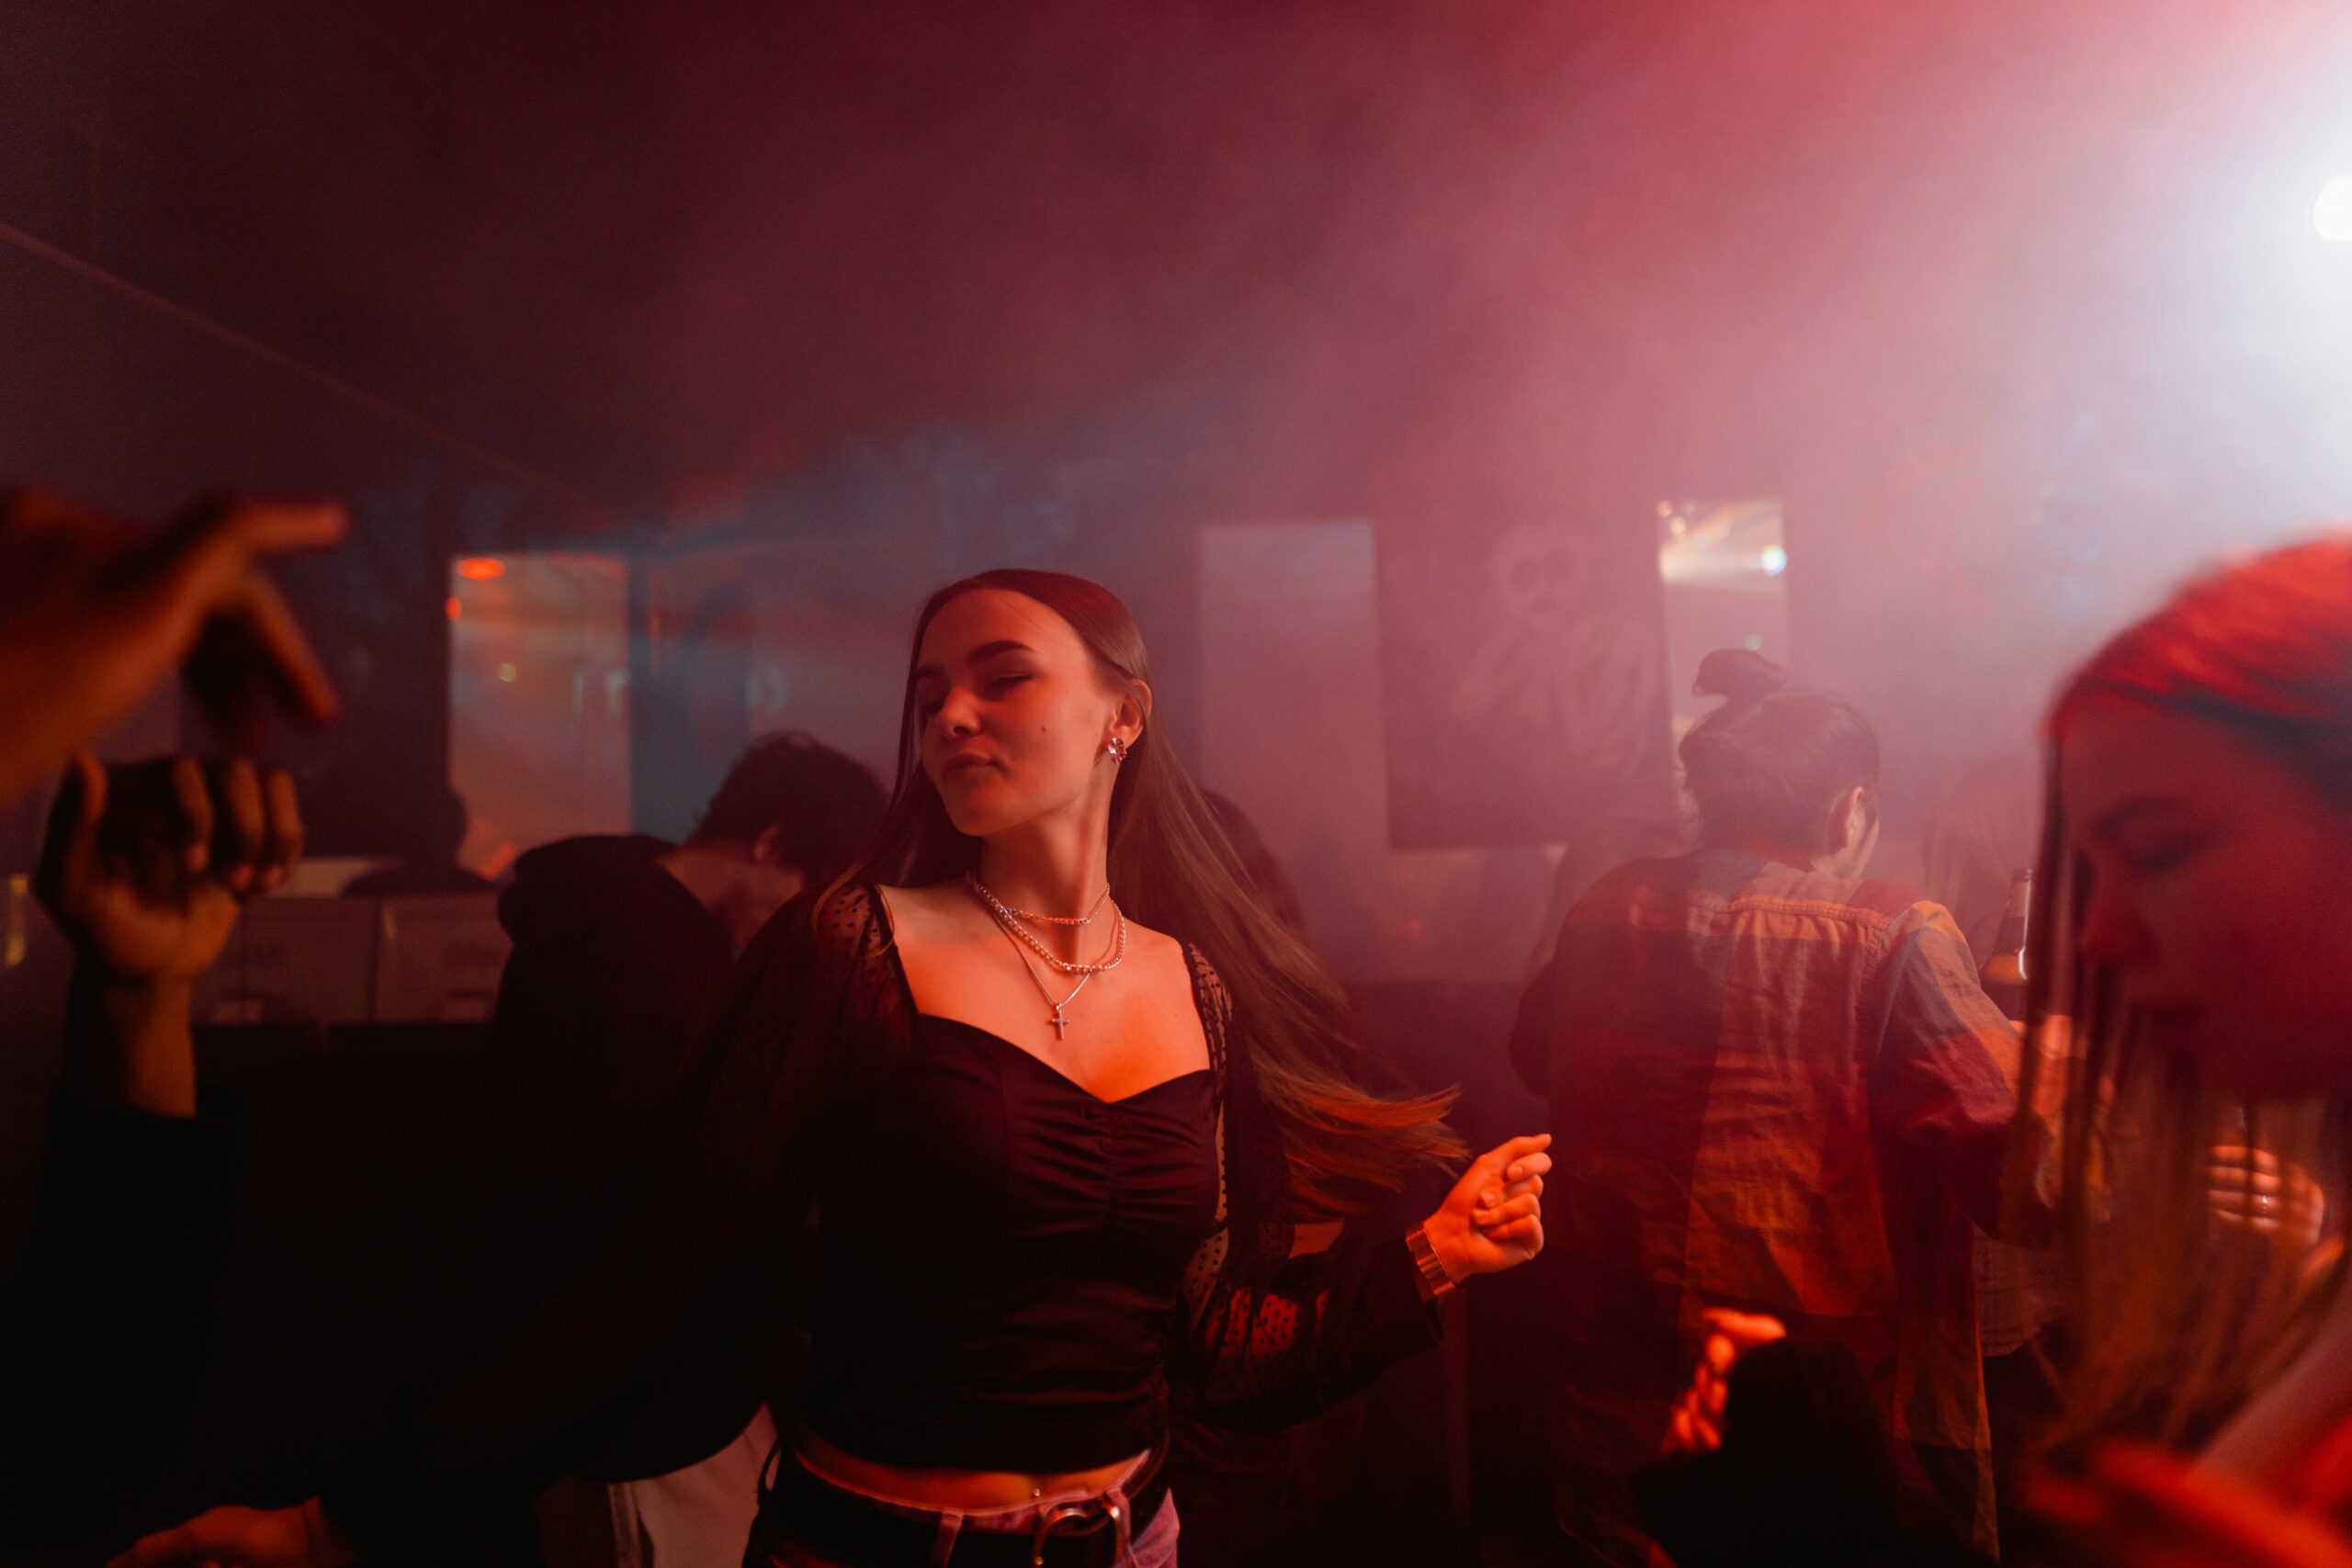 A girl in a black top dances in a bar with smoke and purple lights.